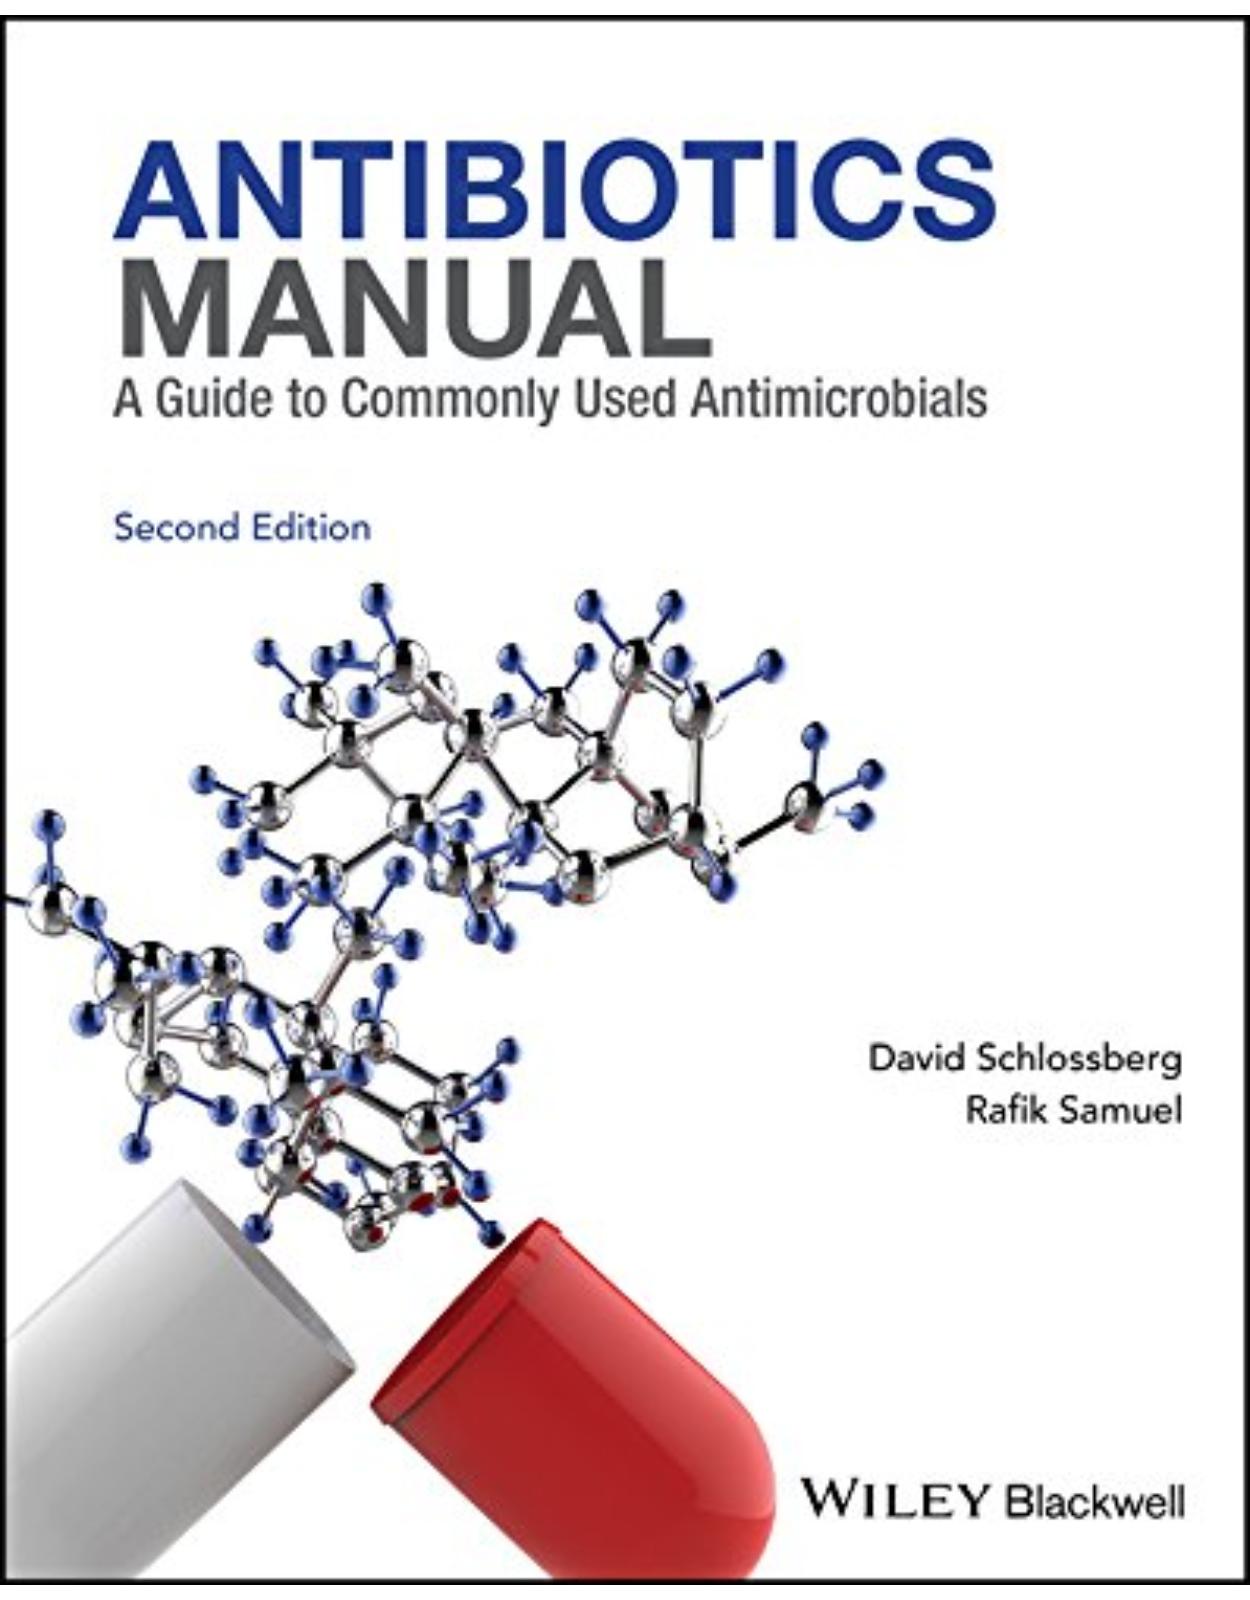 Antibiotics: A Guide to commonly used antimicrobials